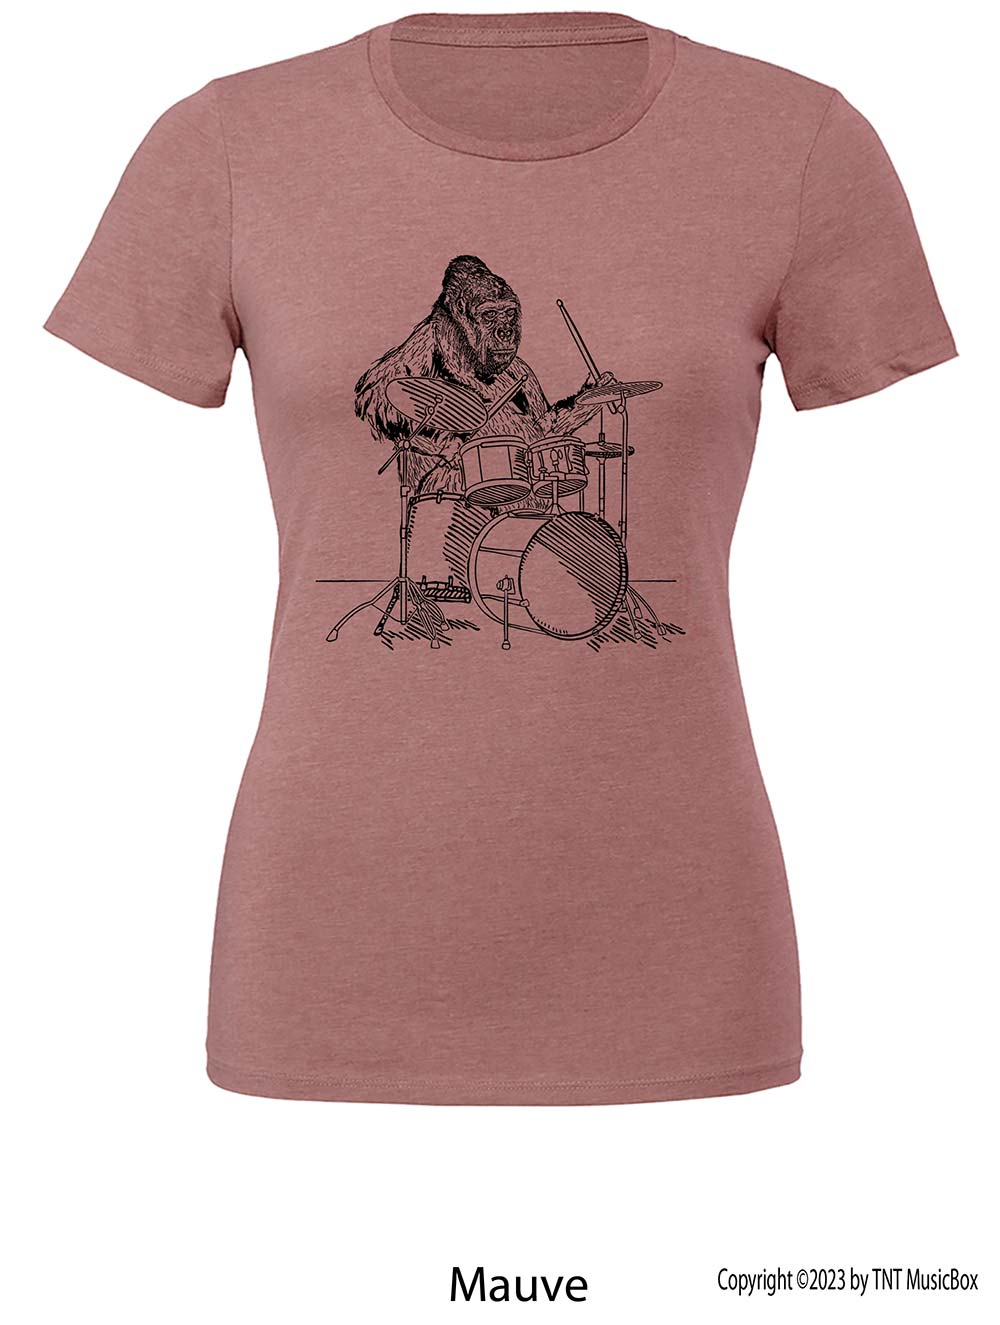 Gorilla playing drums on a Mauve t-shirt.